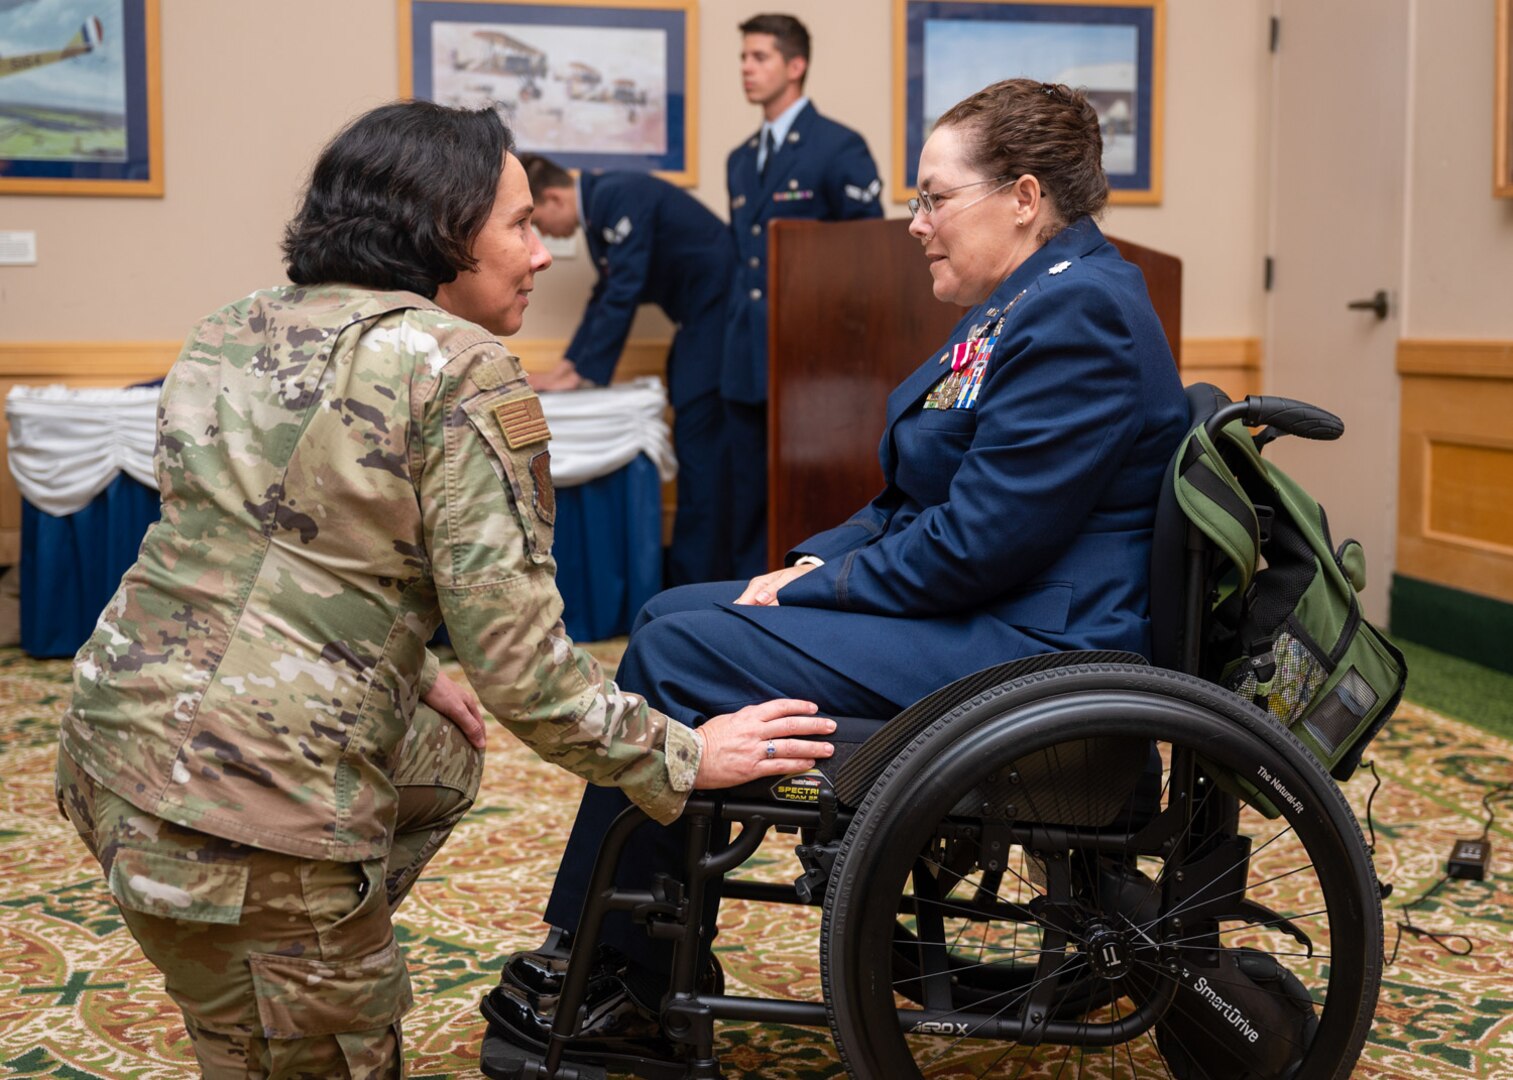 Brig. Gen. Jeannine Ryder, 59th Medical Wing commander, gives her support and well wishes to Lt. Col. (ret.) Dana Duerr, who recently served as Senior Program Manager of the Nurse Corps Education and Training Program at Air Force Medical Readiness Agency, during her retirement ceremony in the Gateway Club at Joint Base San Antonio-Lackland, Texas, Aug. 30, 2023. The Airman Medical Transition Unit has provided leadership, administrative support and comprehensive transition planning during Duerr’s care. (U.S. Air Force photo by Senior Airman Melody Bordeaux)